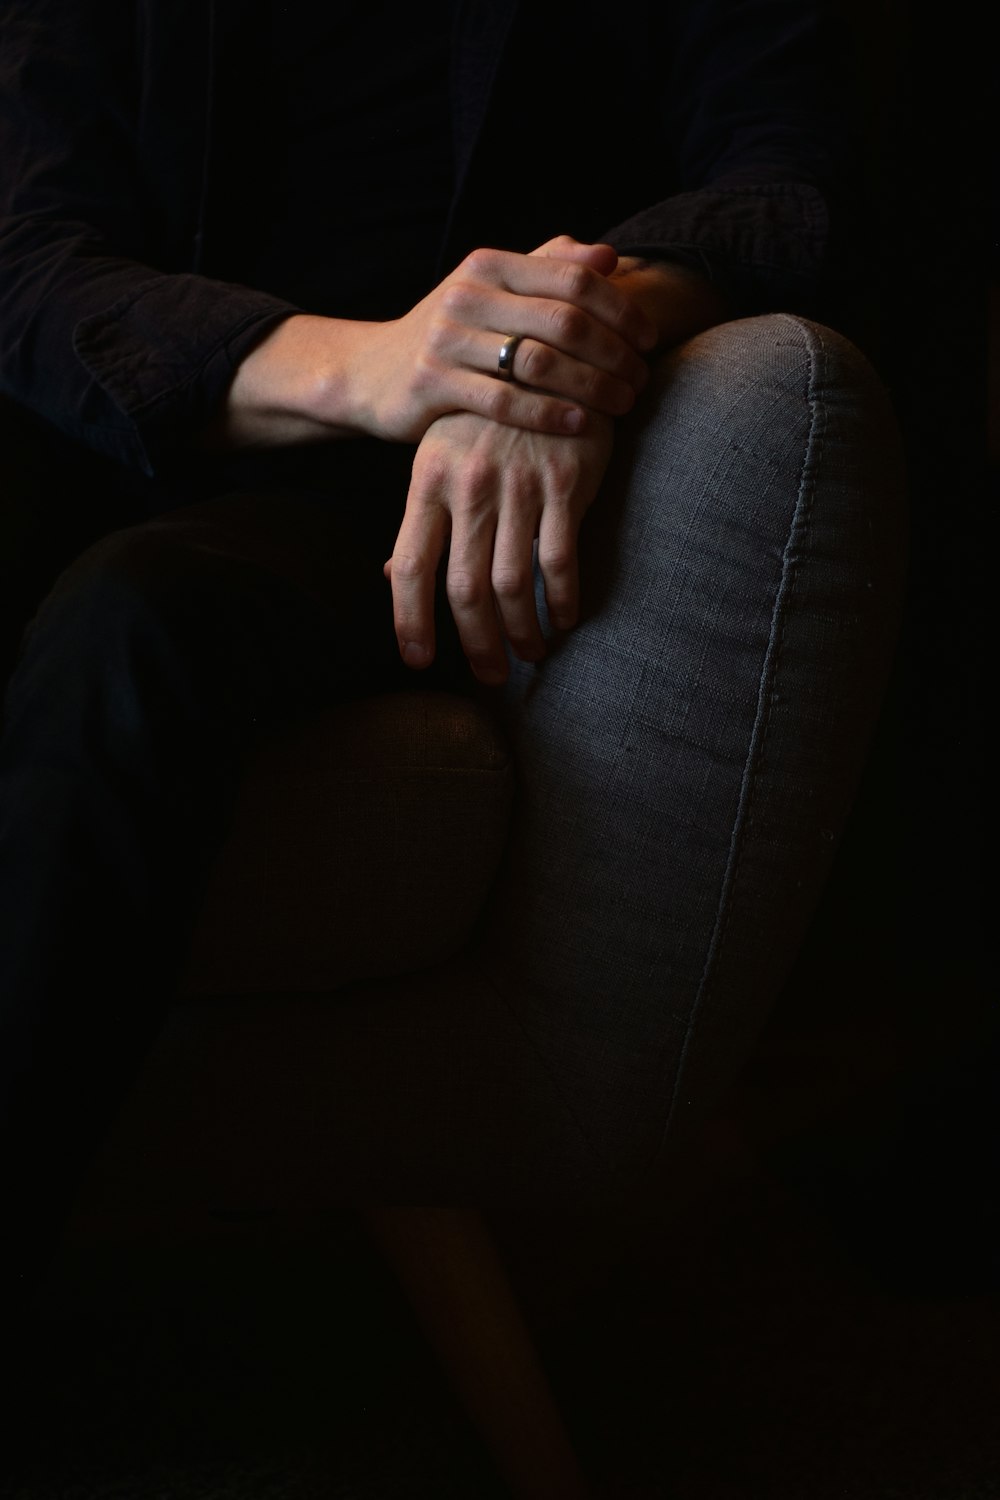 person in black pants sitting on gray couch